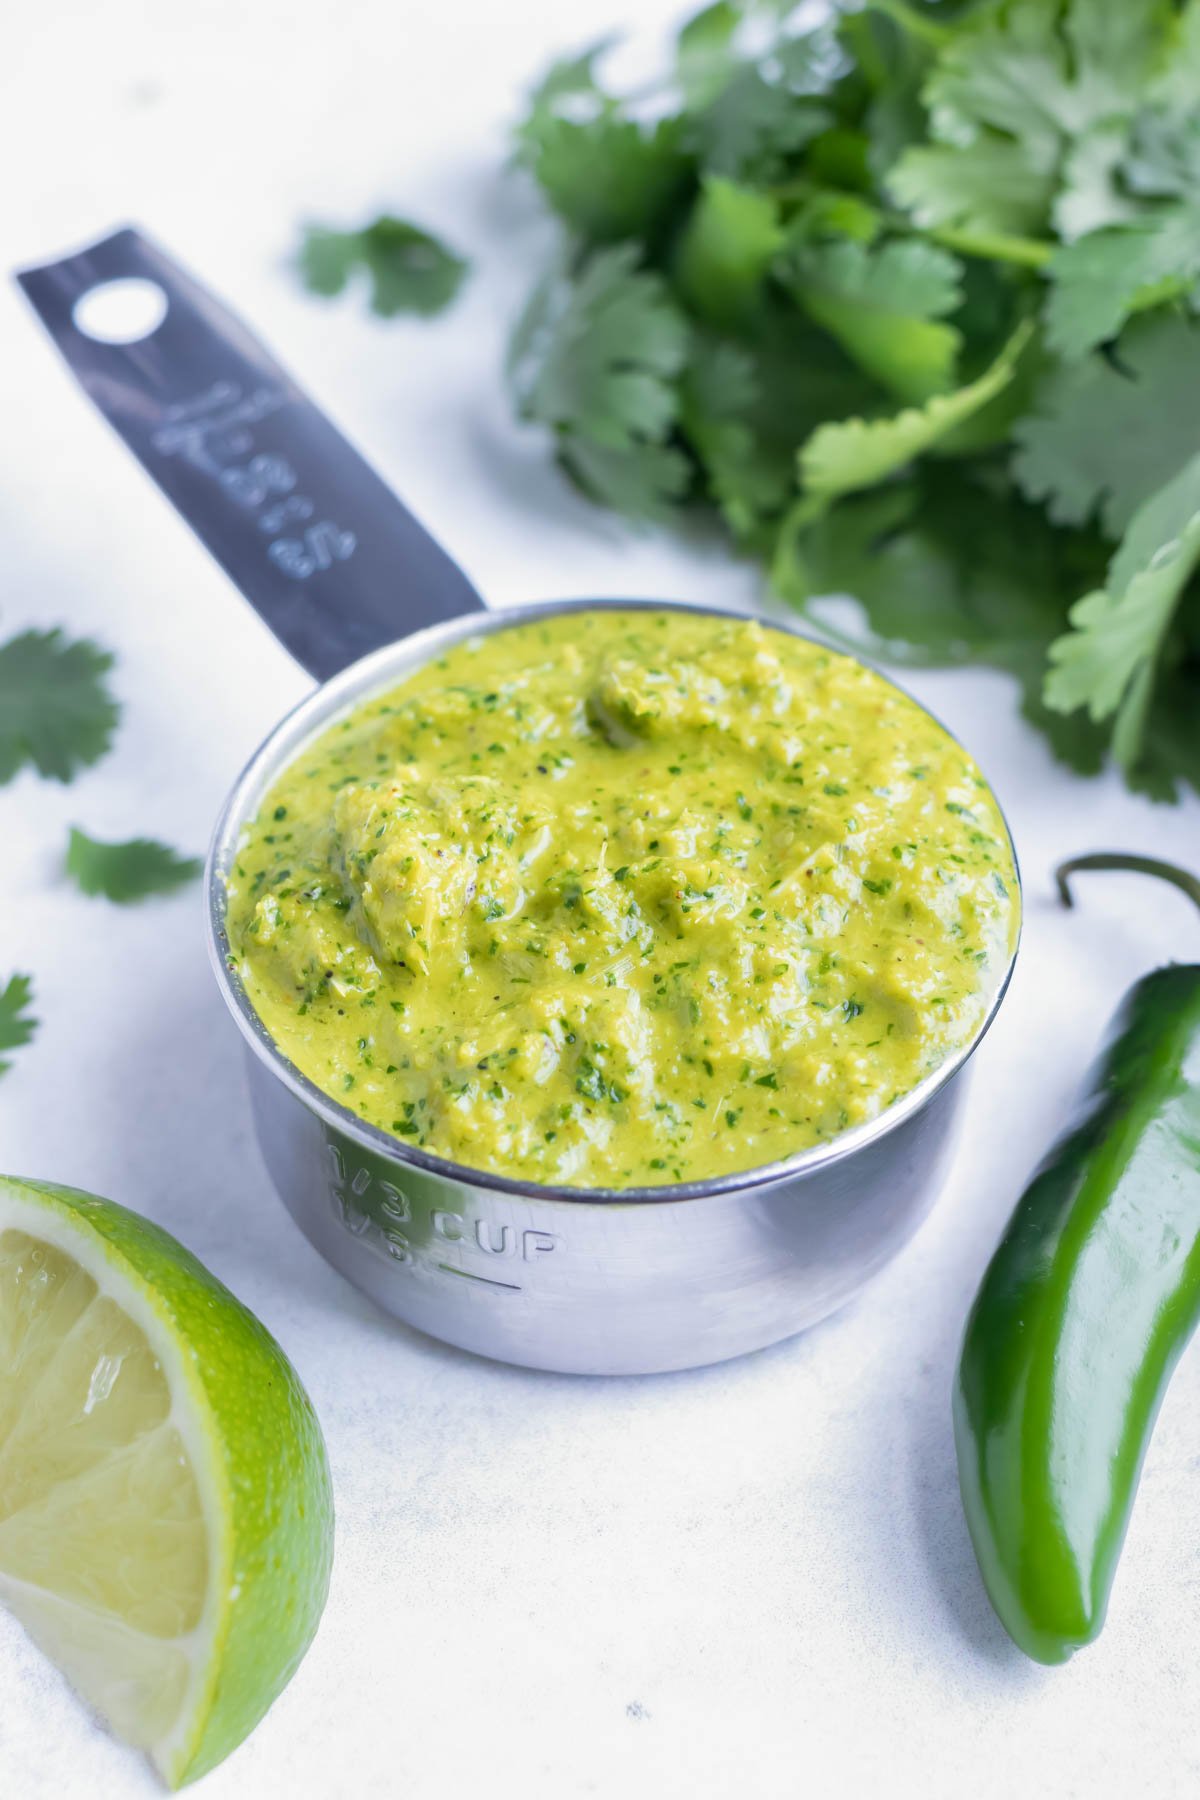 Homemade, gluten-free Thai green curry paste is measured to be used in Green curry chicken.